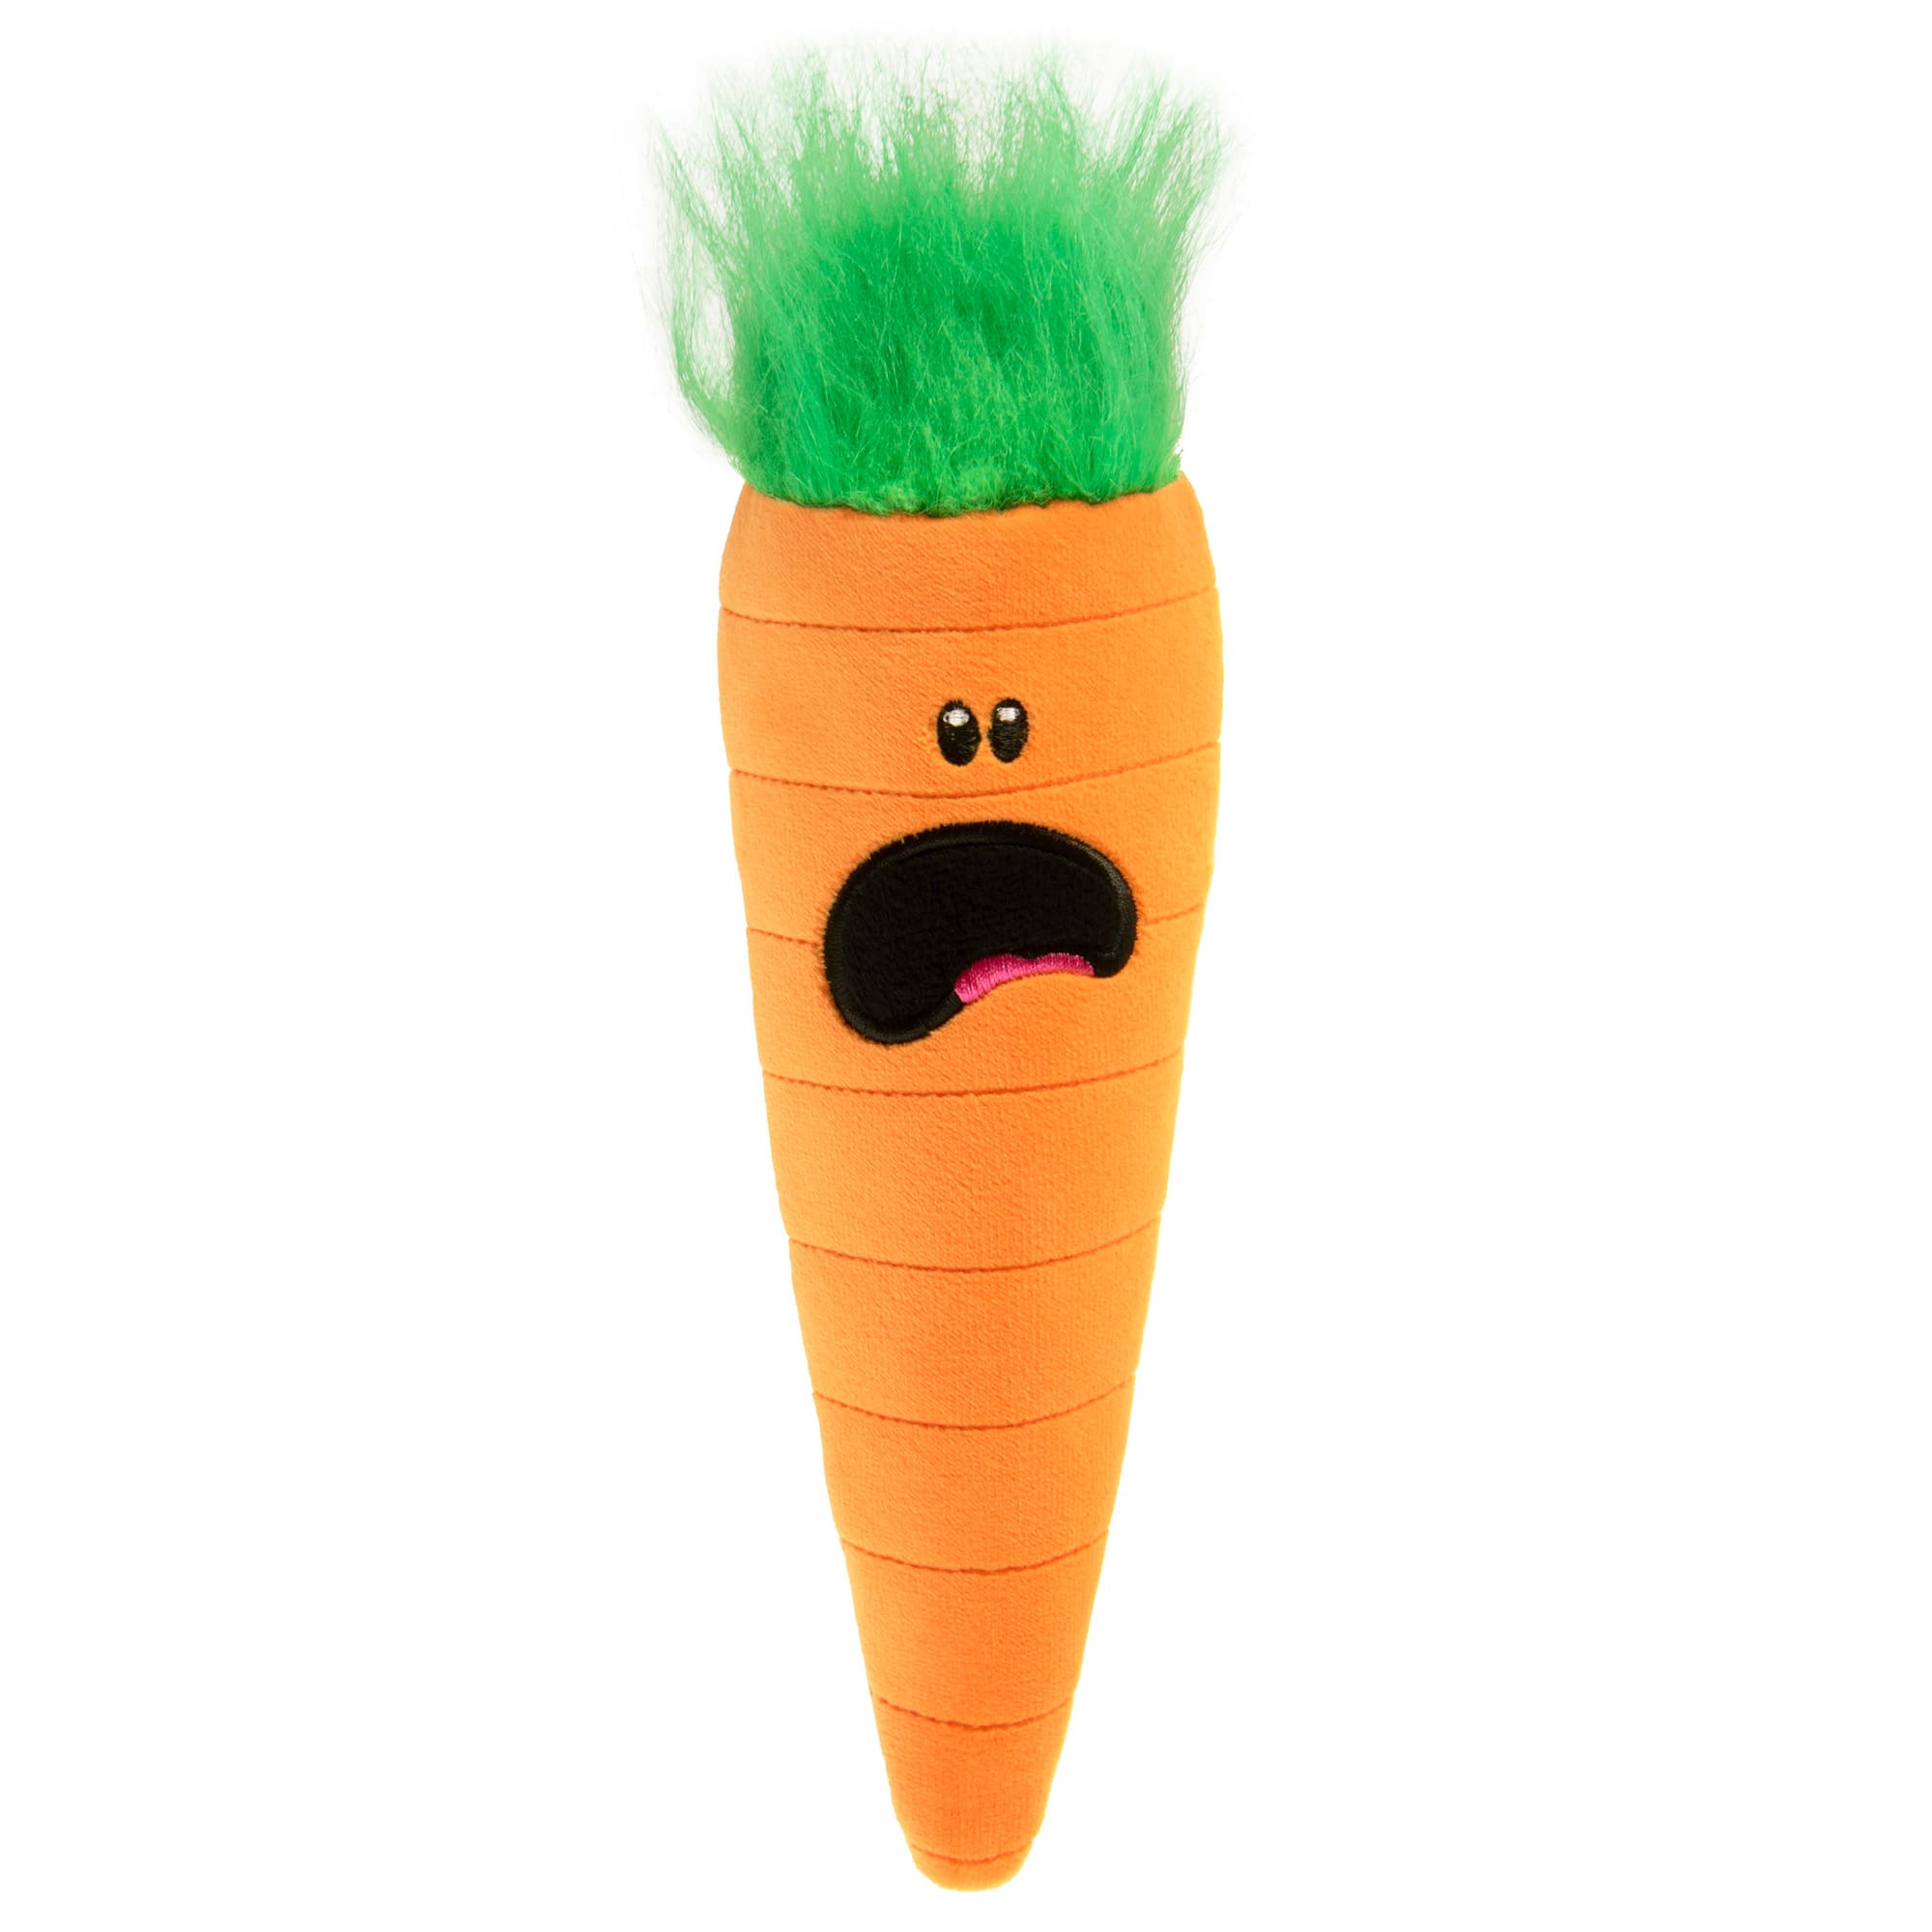 Manufacture & Customize - Rubber Carrot Squeaky Dog Toy, Customizable  Products